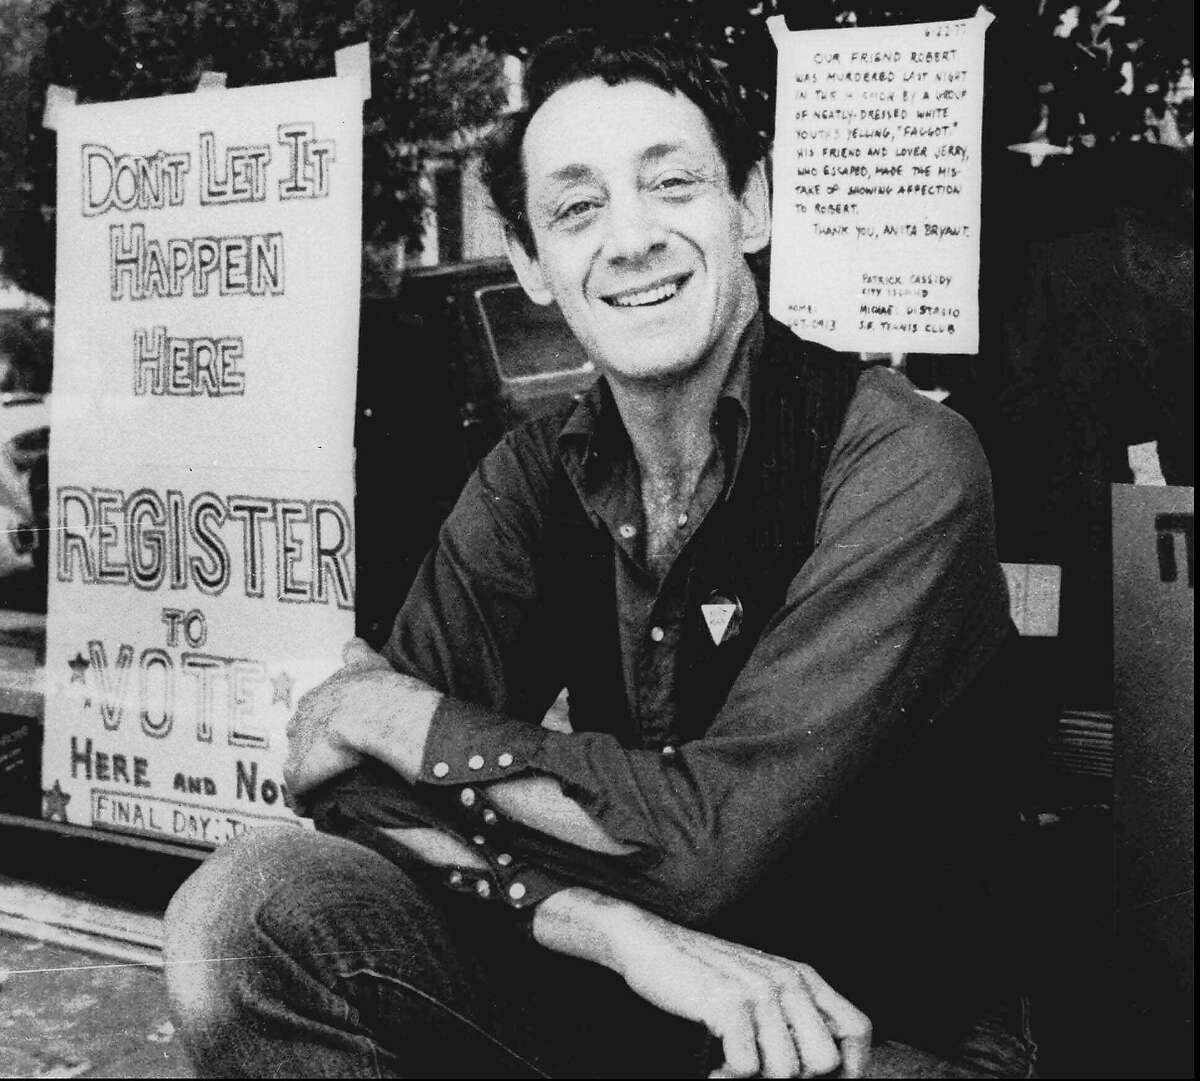 FILE - In a Nov. 9, 1977 file photo, Harvey Milk poses in front of his camera shop in San Francisco. A charter amendment sponsored by city Supervisor David Campos on Tuesday, Jan. 15, 2013 planned to introduce legislation asking voters to rename the city's airport after slain gay rights leader Harvey Milk. The amendment would put the question of creating Harvey Milk-San Francisco International Airport on San Francisco's November ballot. Milk became one of the first openly gay men elected to public office in the United States when he won a seat on the board of supervisors in 1977. He was assassinated at City Hall, along with Mayor George Moscone, more than a year later. (AP Photo, File)